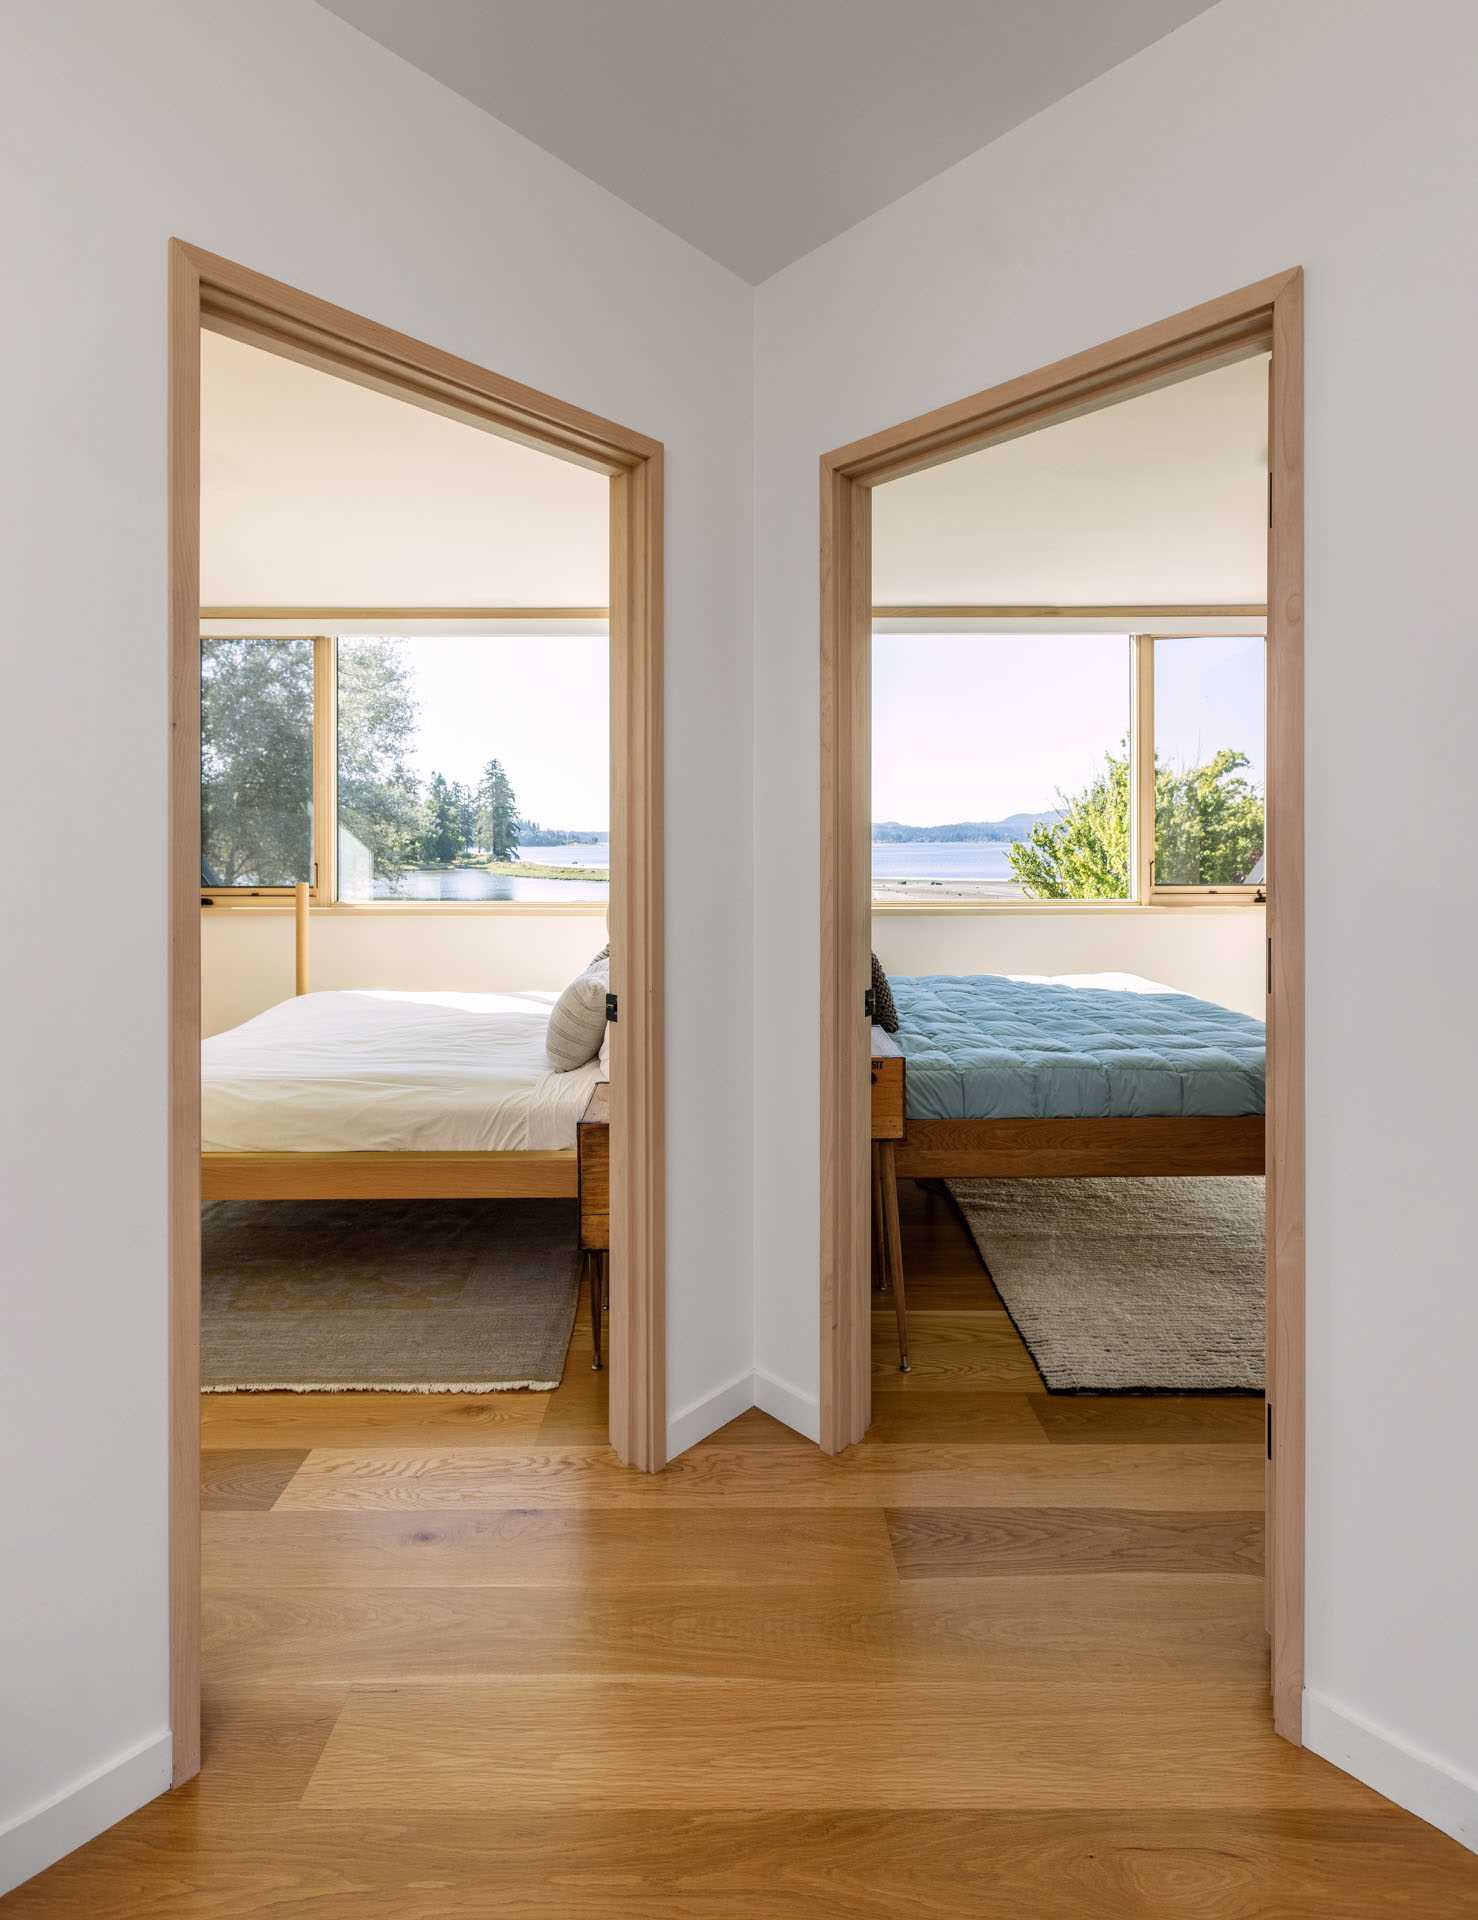 Two bedrooms with a mirror image design.